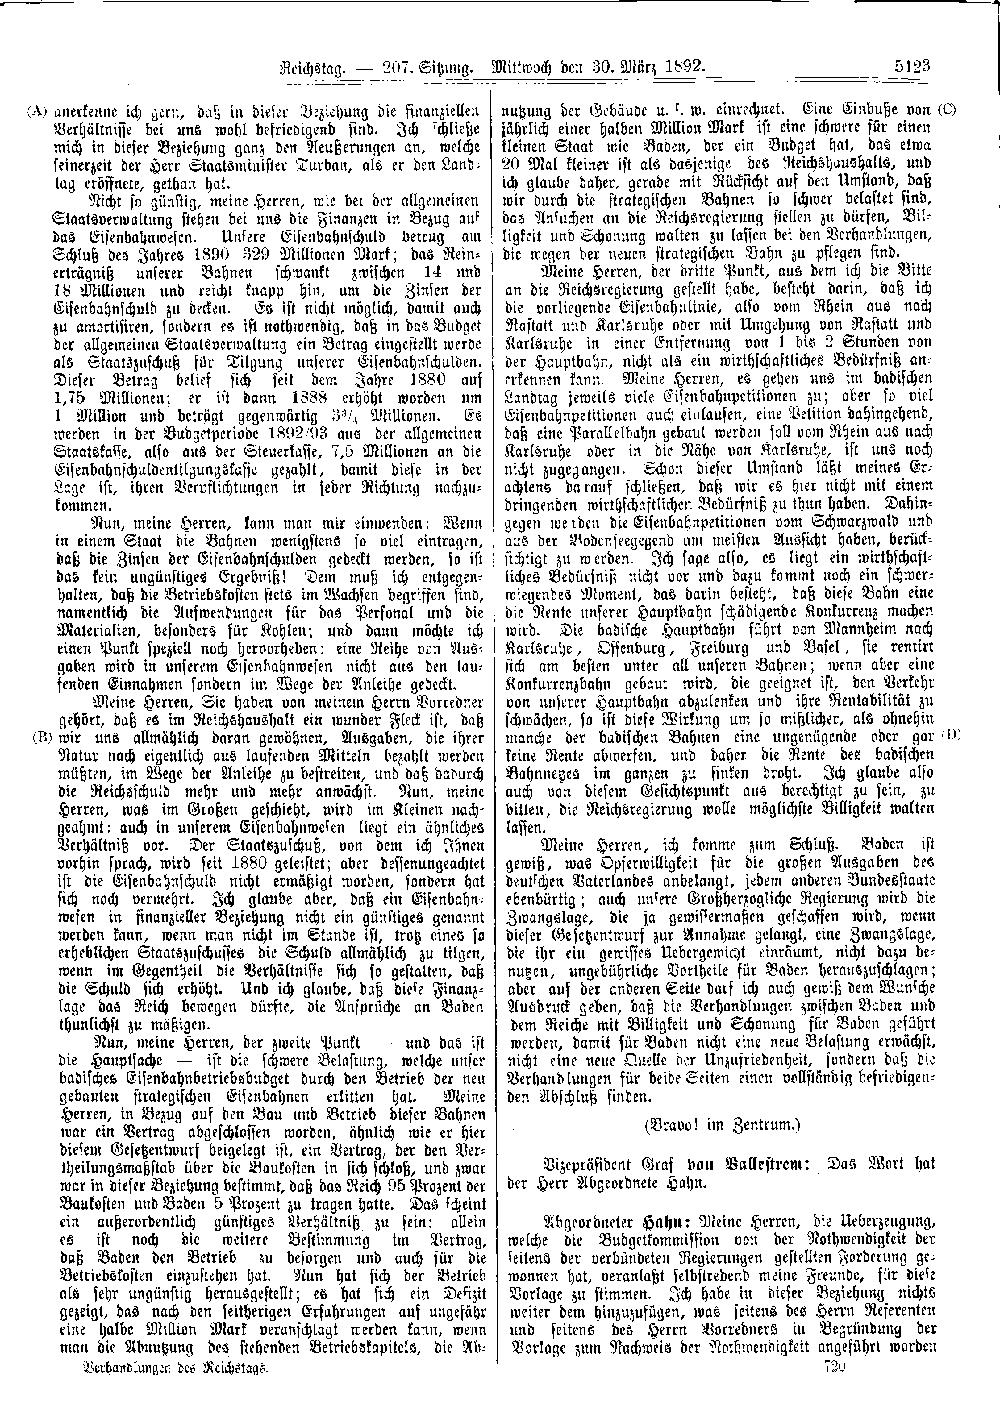 Scan of page 5123